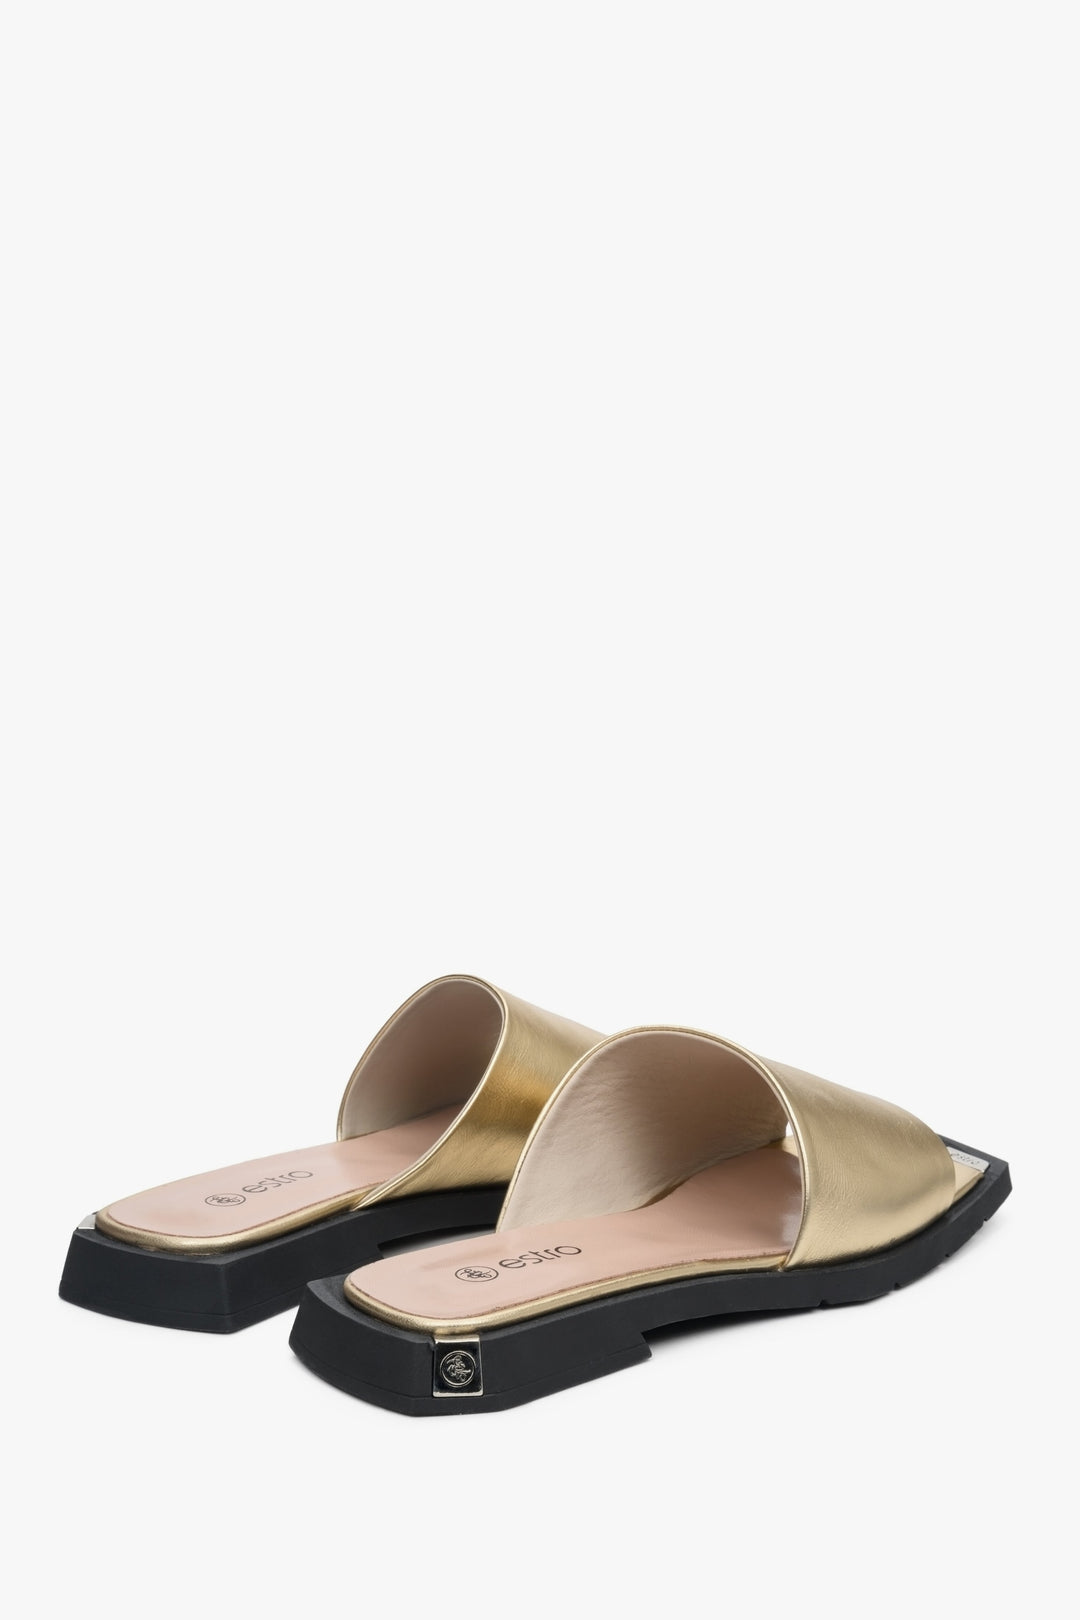 Women's leather mules for summer in gold - presentation of the back of the model.